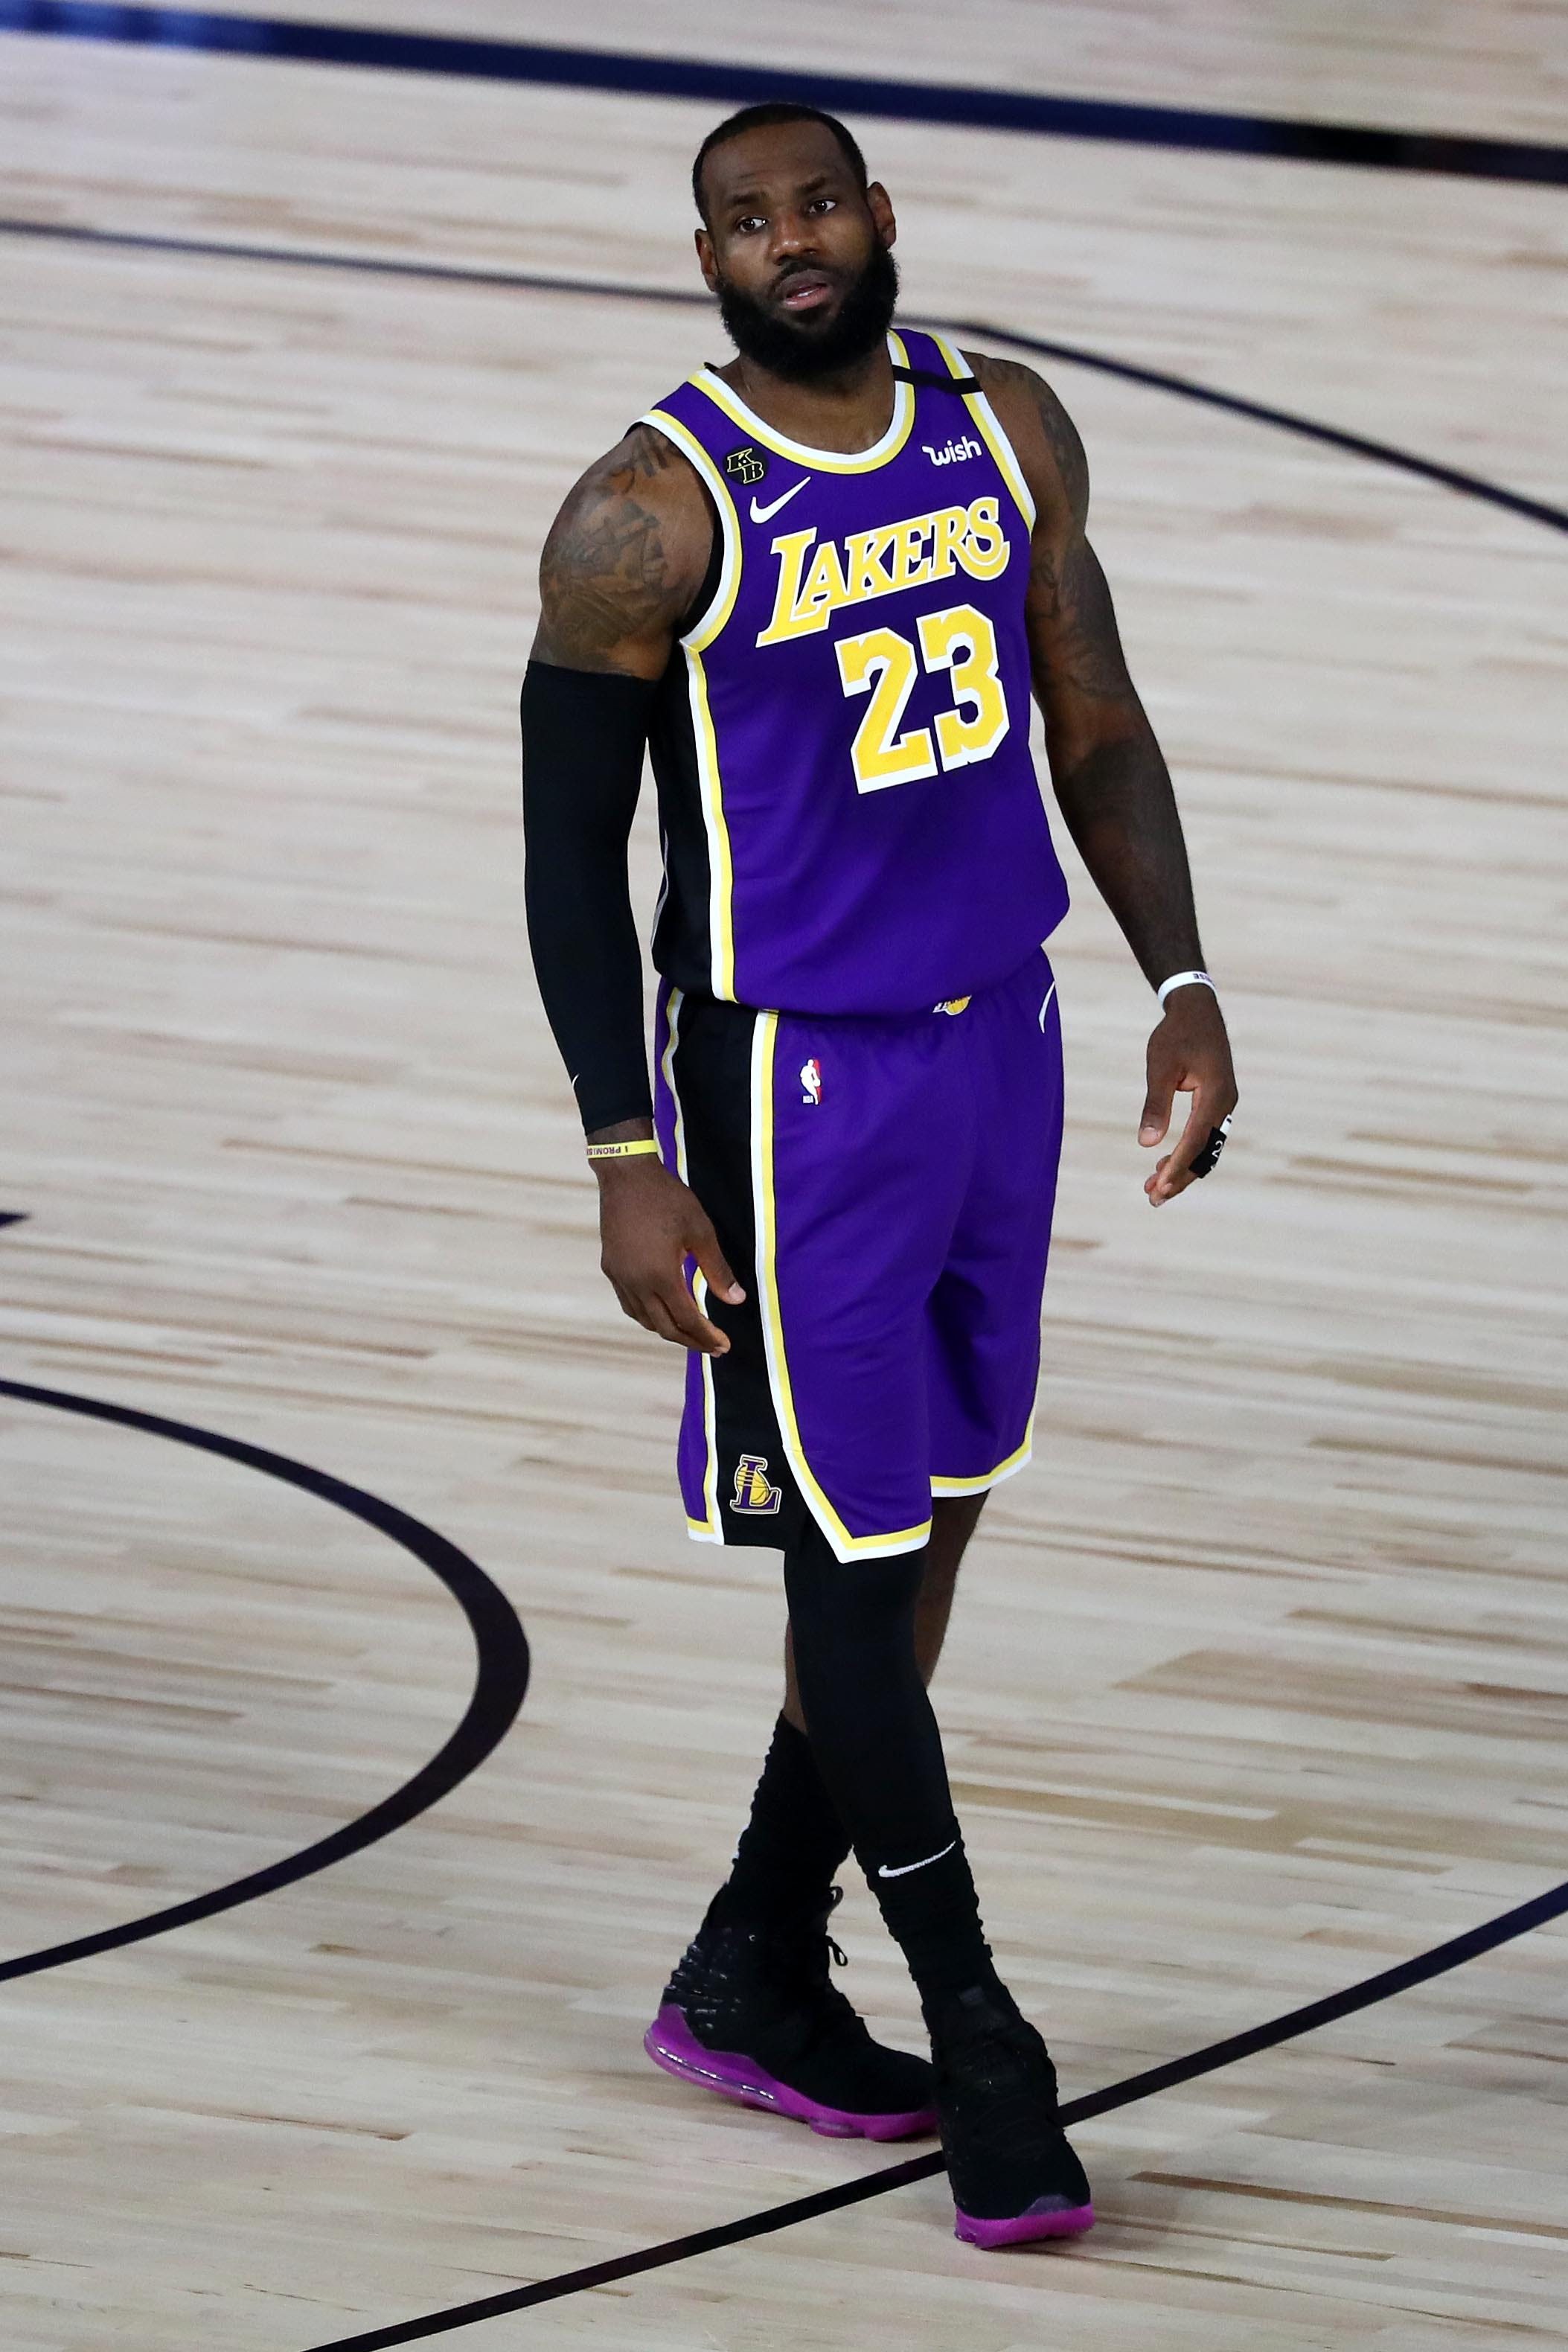 how is lebron james